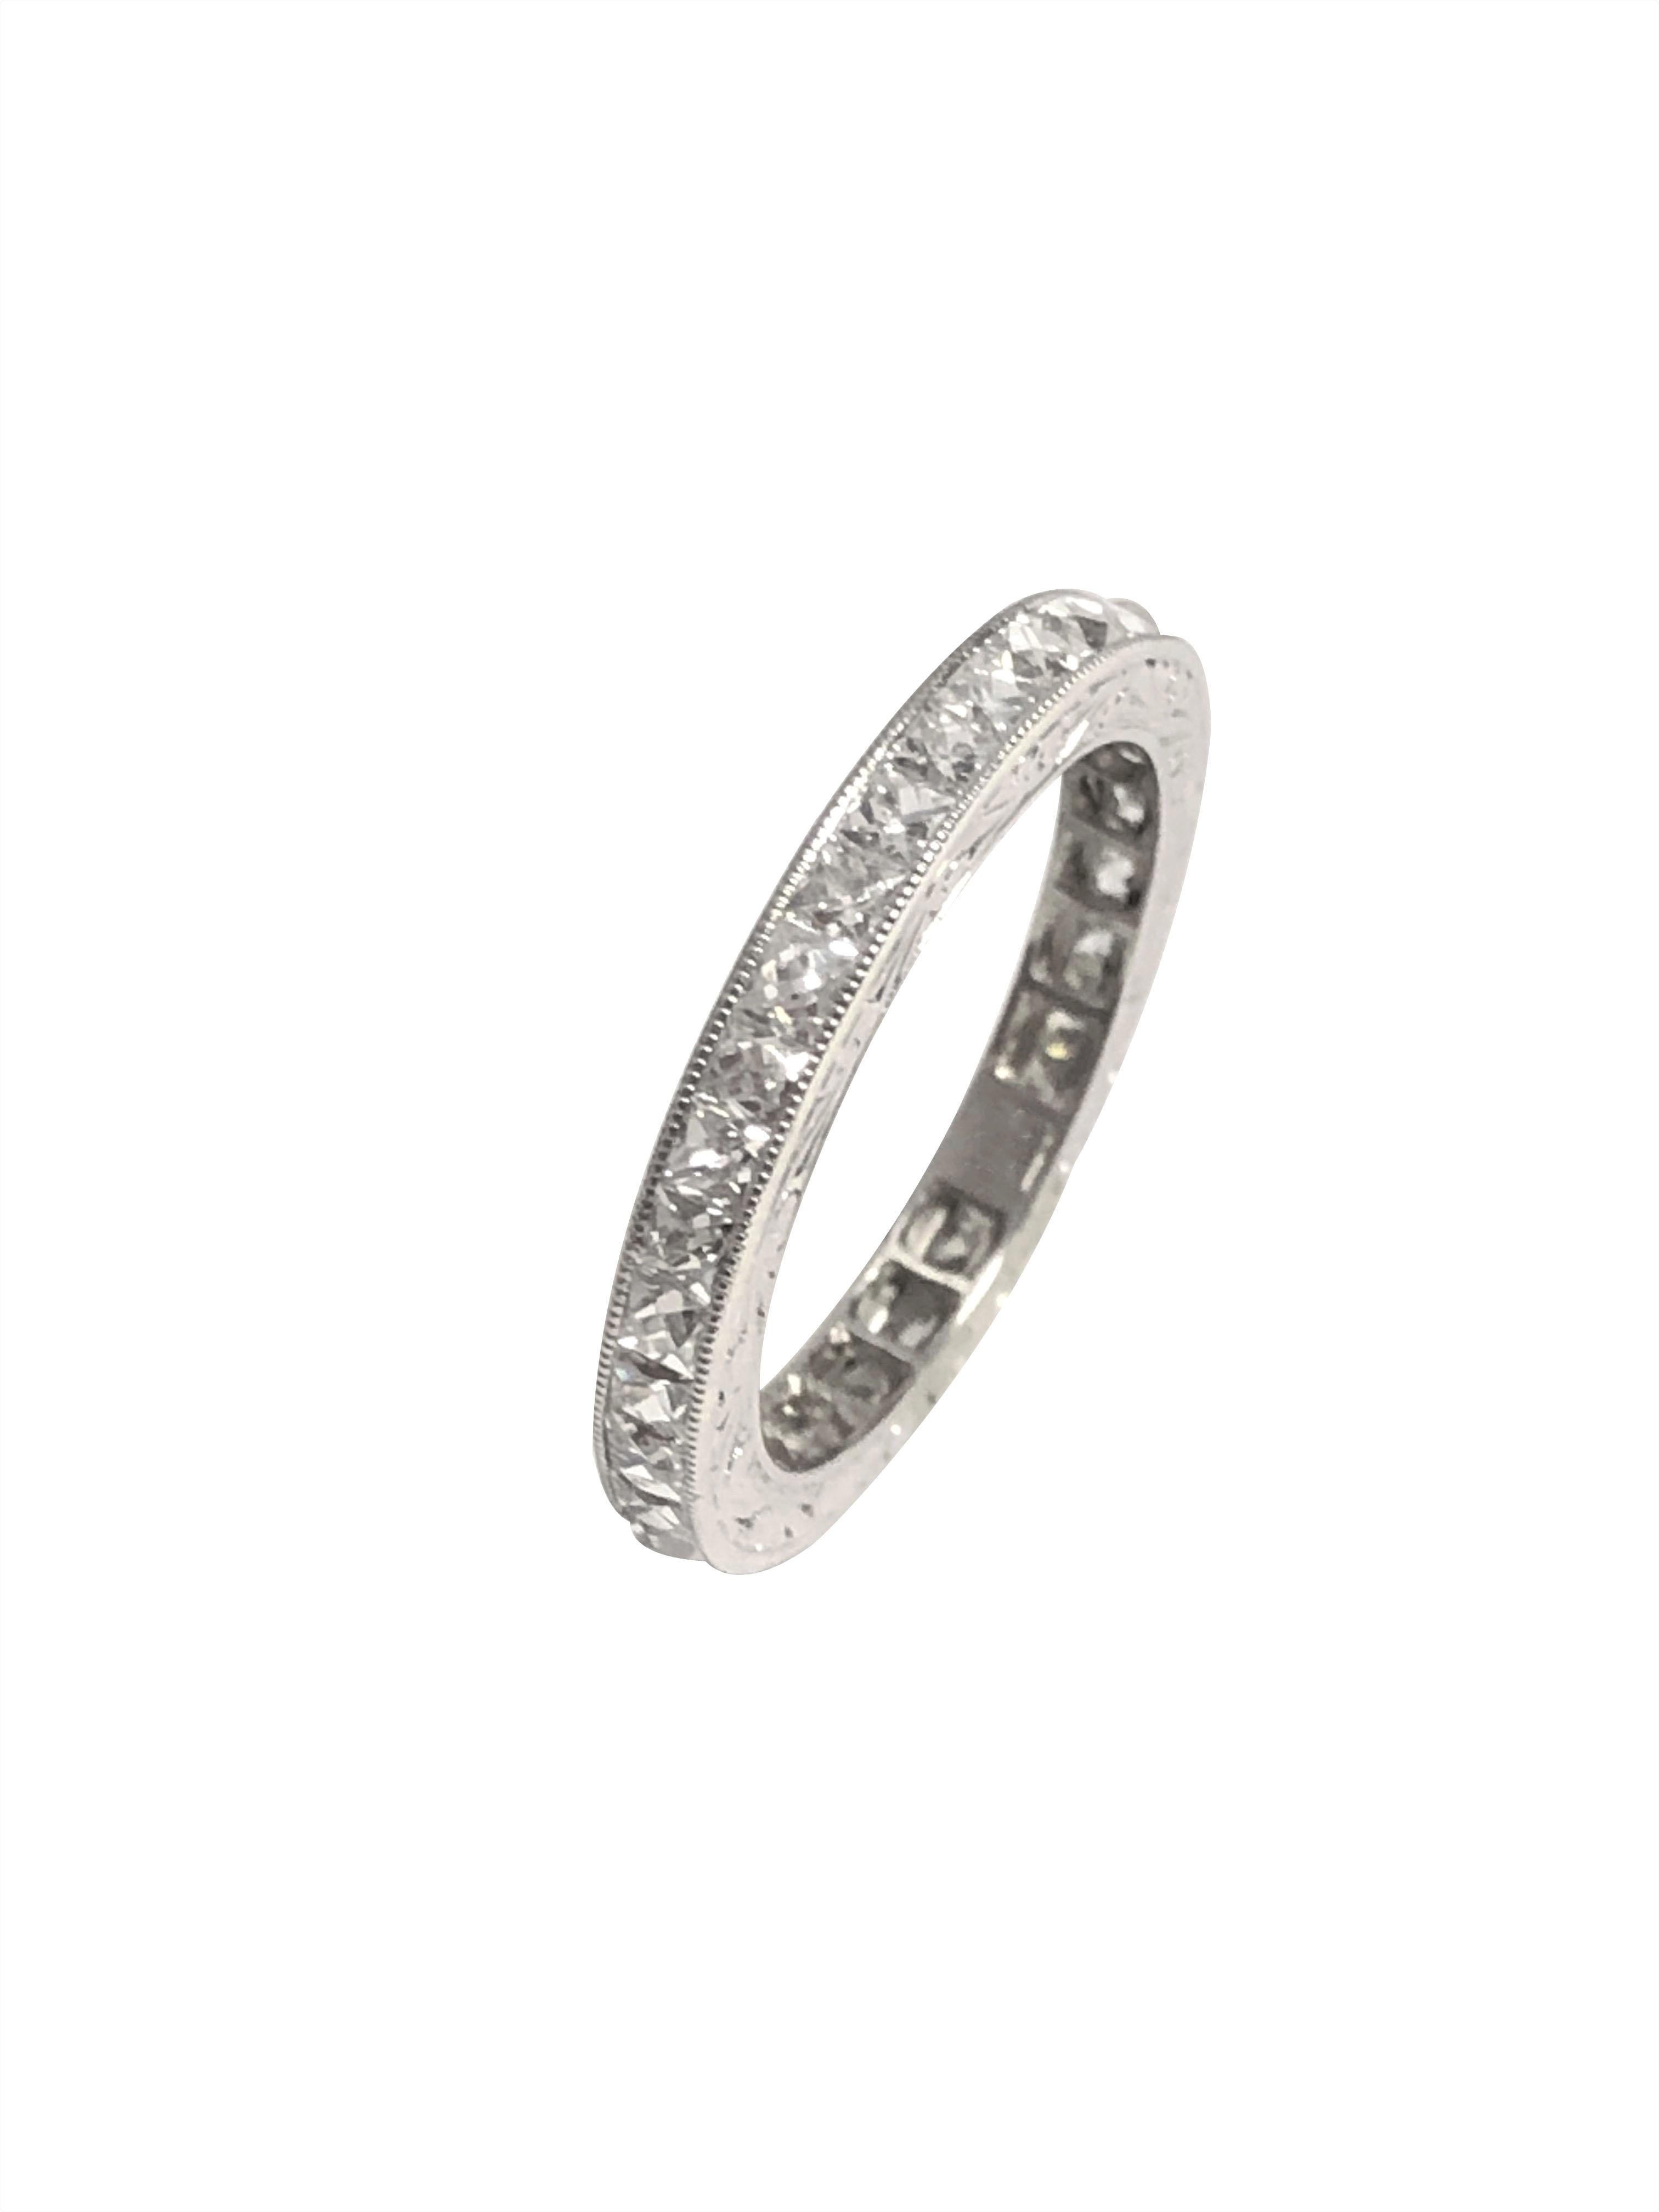 Platinum and French cut Diamonds Eternity Band Ring, measuring 2.5 M.M. wide and set with French cut Diamonds totaling 2 Carats and Grading as G - H in color and VS in clarity, having fine hand engraved design work and is a finger size 6 1/4. 